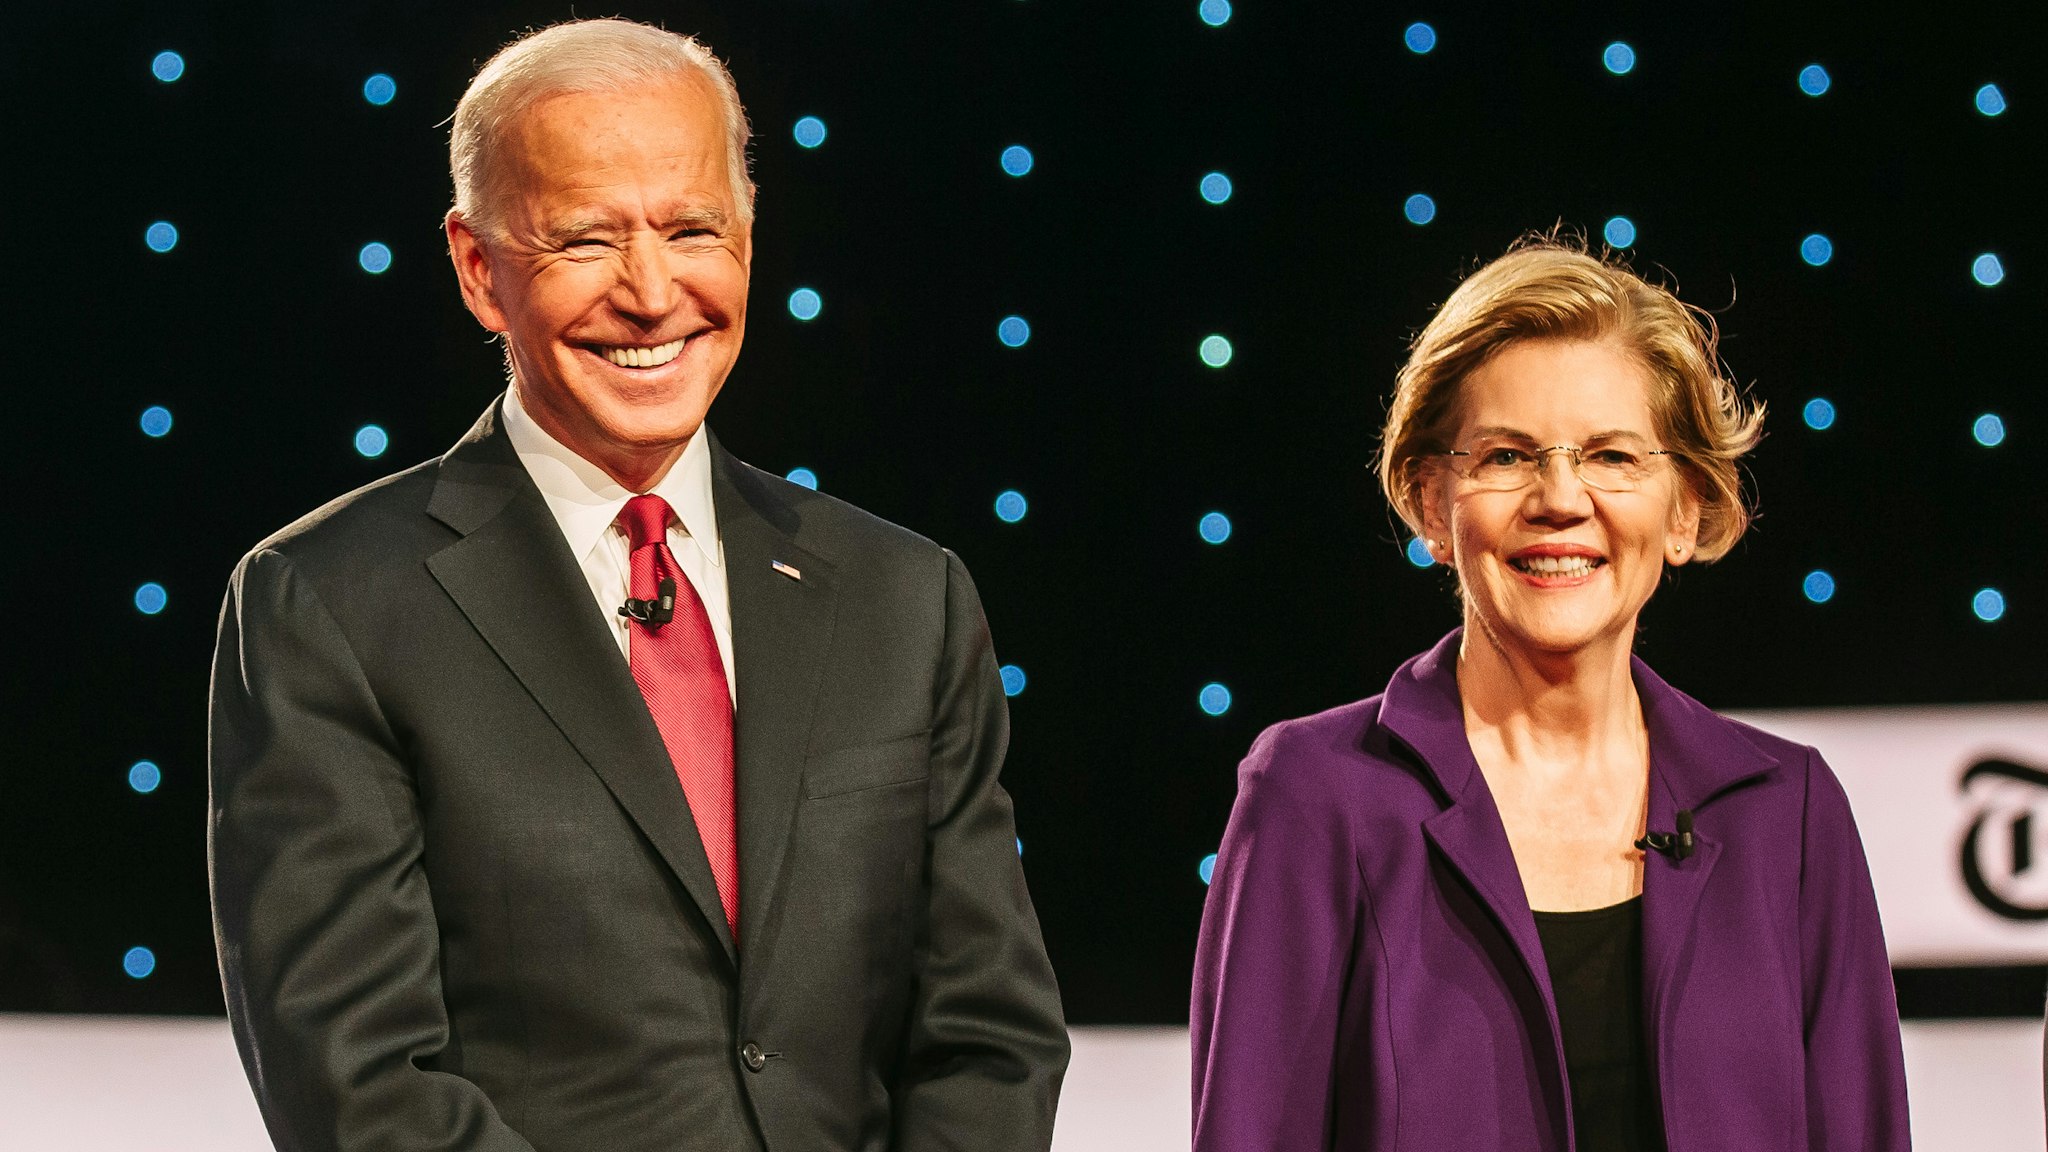 2020 Democratic presidential candidates Senator Bernie Sanders, an independent from Vermont, from left, former U.S. Vice President Joe Biden, and Senator Elizabeth Warren, a Democrat from Massachusetts, arrive on stage for the Democratic presidential candidate debate in Westerville, Ohio, U.S., on Tuesday, Oct. 15, 2019. The candidates meet for the fourth debate after an extraordinary series of events that has dramatically altered the race since the last forum in September.